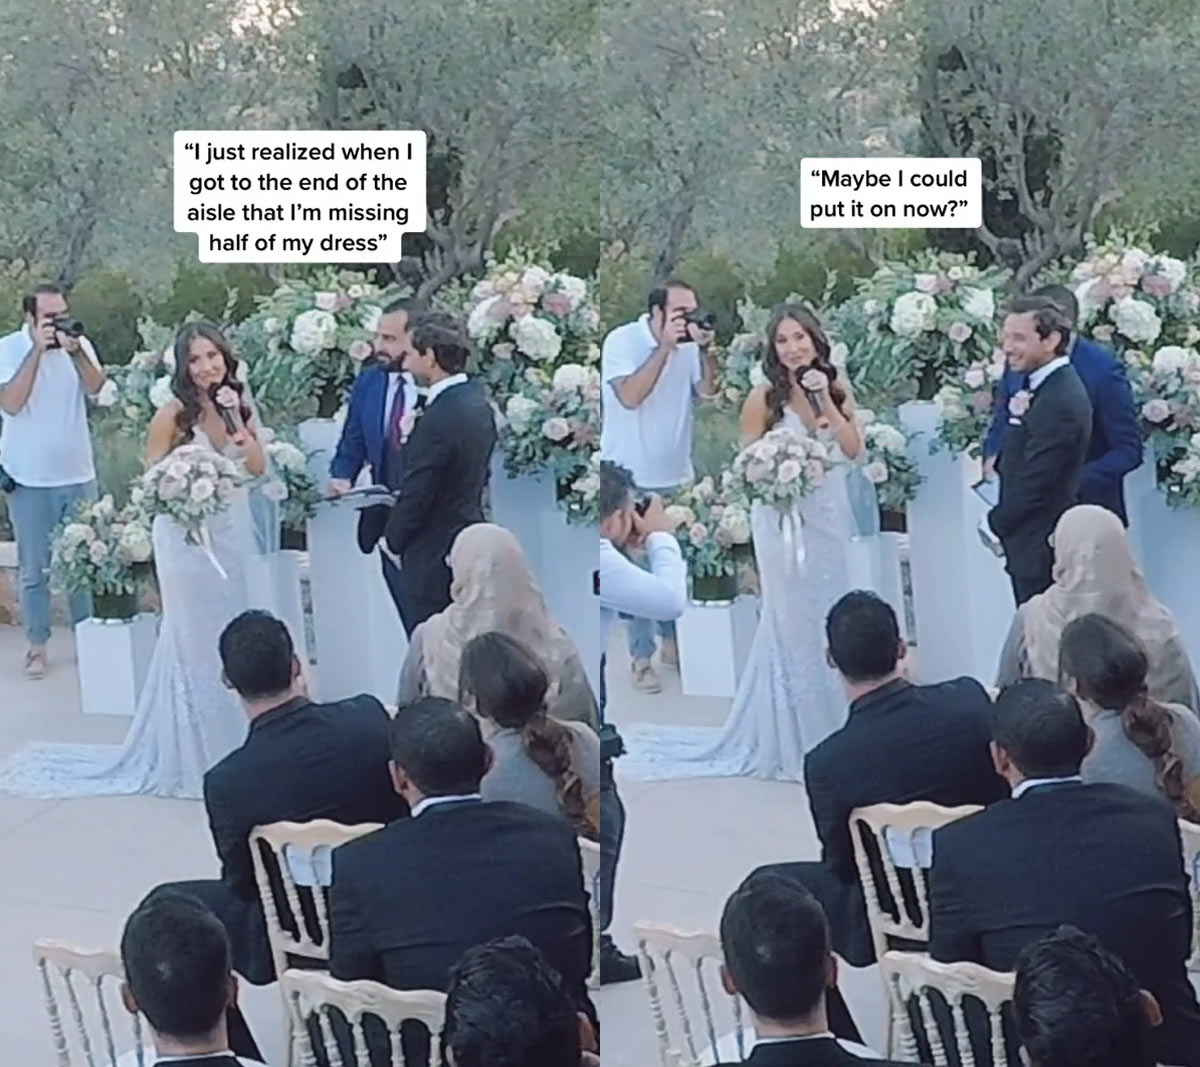 Dubai-Based Bride Stops Her Wedding to Wear the Rest of Her Dress